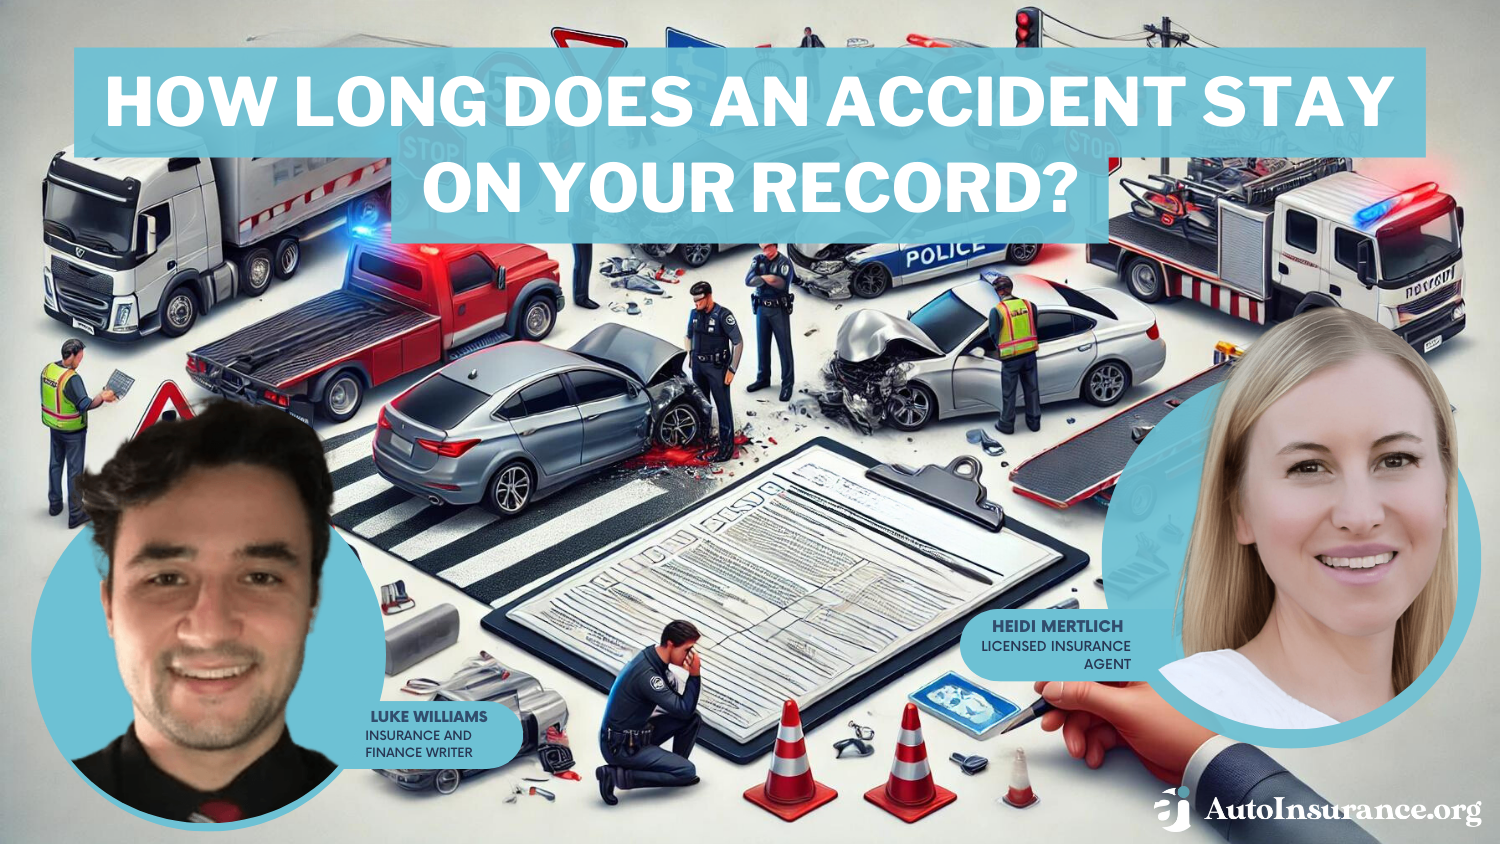 How long does an accident stay on your record?